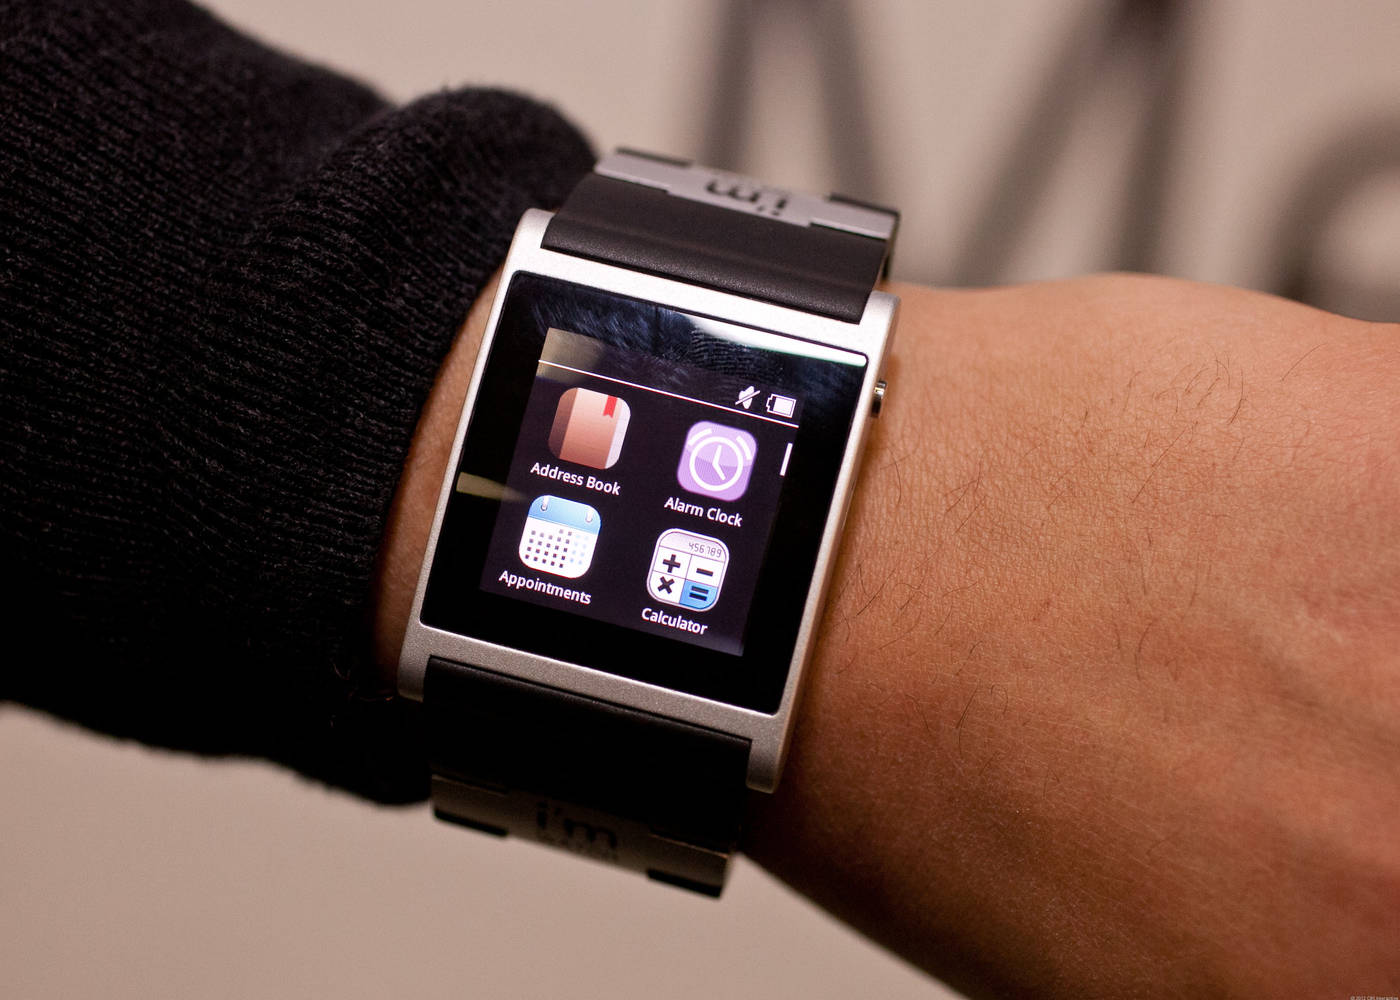 Samsung Galaxy Gear specs and images - 1